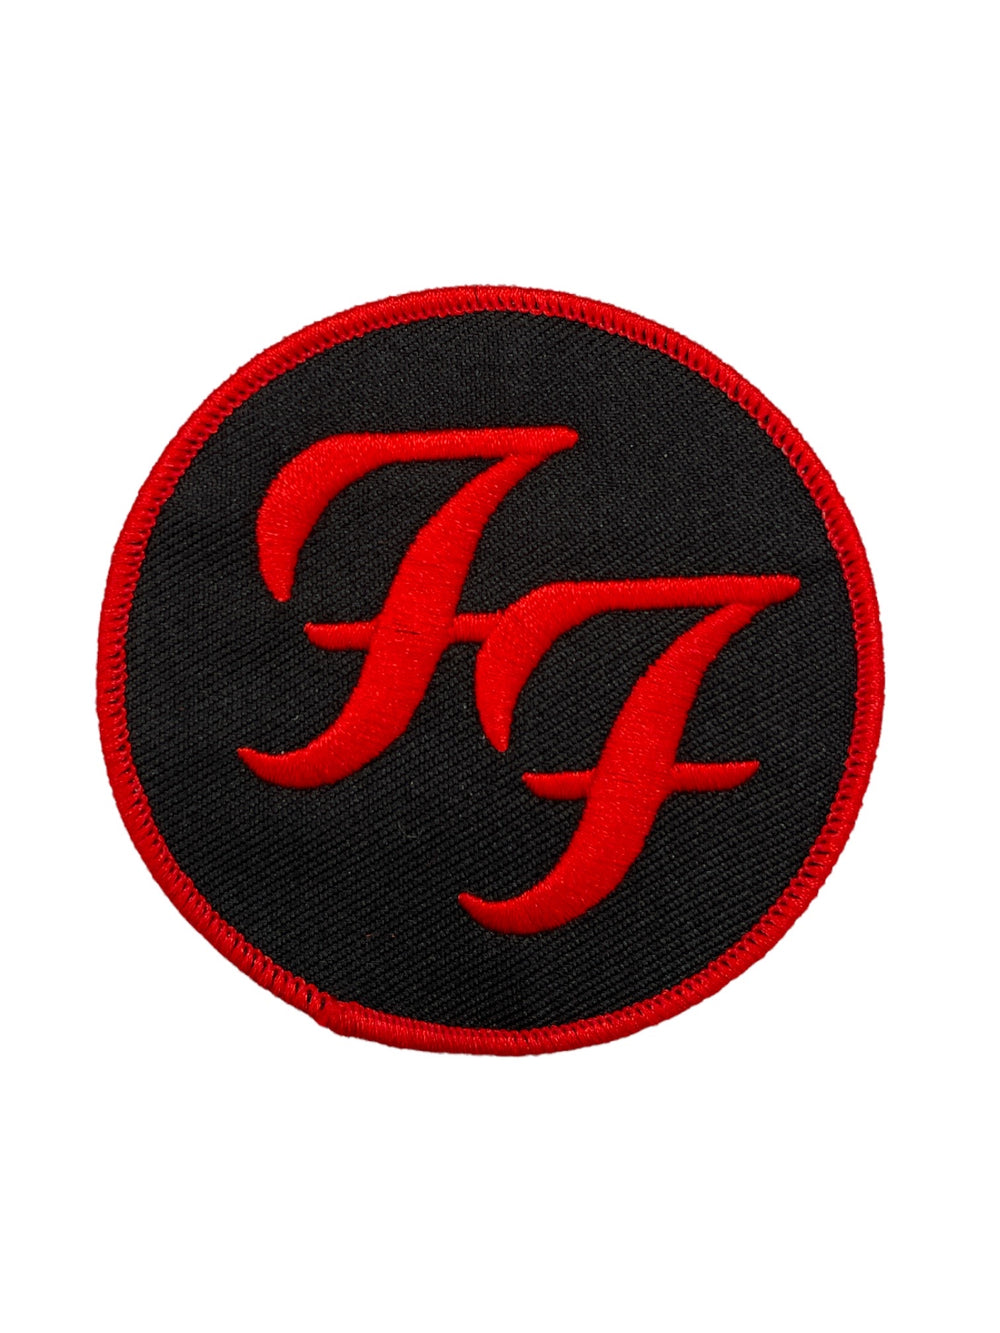 Foo Fighters The Circle Logo Official Woven Patch Brand New